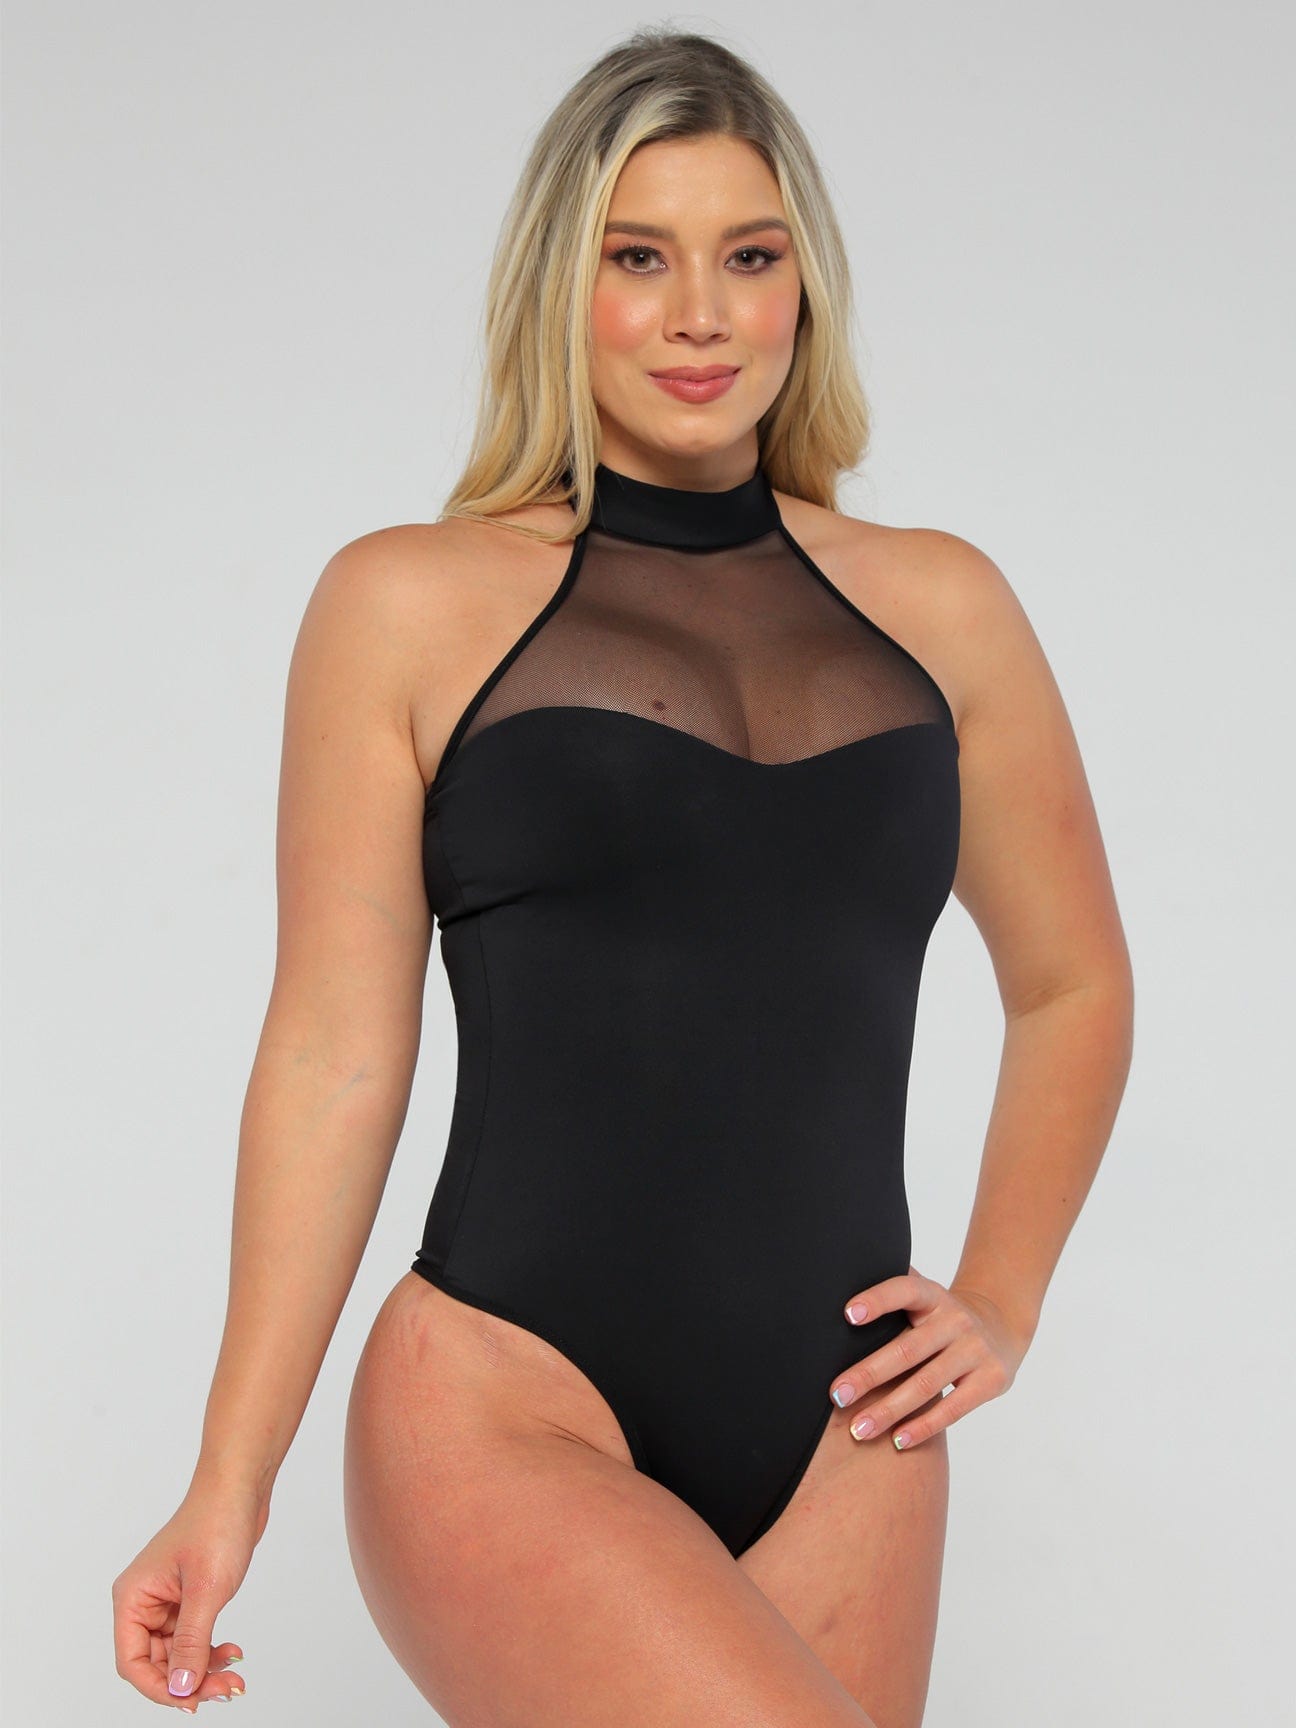 BreWel Galonfulty Body Suit, Bodysuit Shapewear, Bodysuit for Women Tummy  Control Shapewear Seamless Sculpting (2pcs-A,S) at  Women's Clothing  store